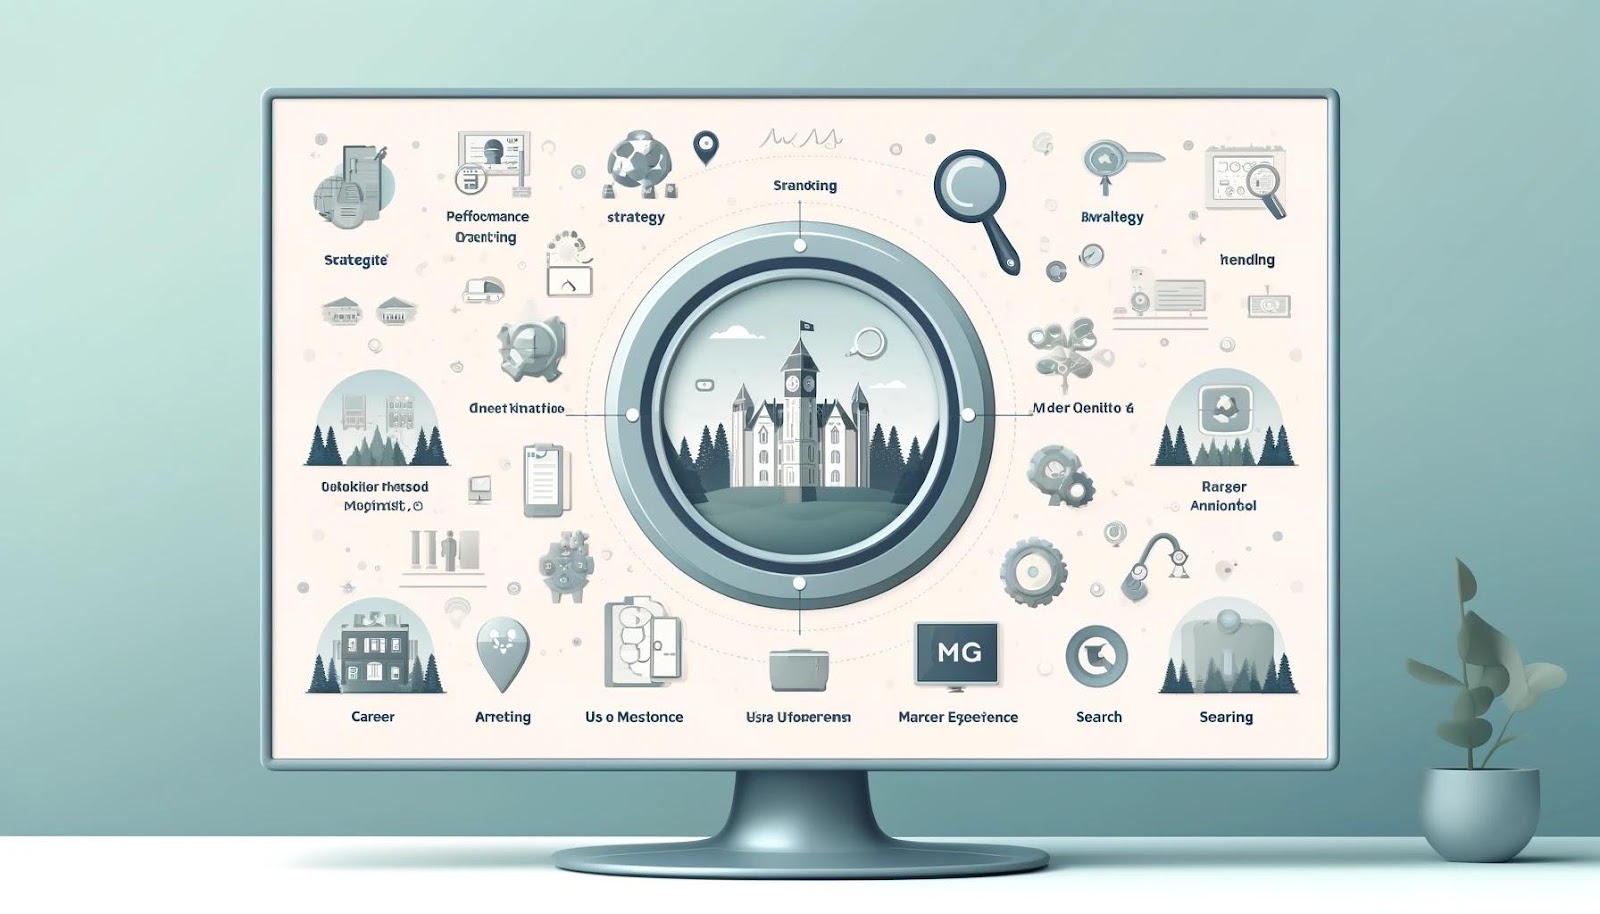 A widescreen image depicting 'VisionPoint Marketing', a digital marketing agency, in a minimalist design with soft, rounded corners. The image should feature icons and symbols representing the company's services: a performance-based advertising icon, a planner for strategy, a magnifying glass for user experience, a brand logo for branding, and a search icon for search services. Include a section with images of prestigious universities and medical institutions highlighting success stories. Also, visualize a career section indicating job openings and benefits, and a blog section filled with marketing articles. The color scheme should be soothing and corporate.